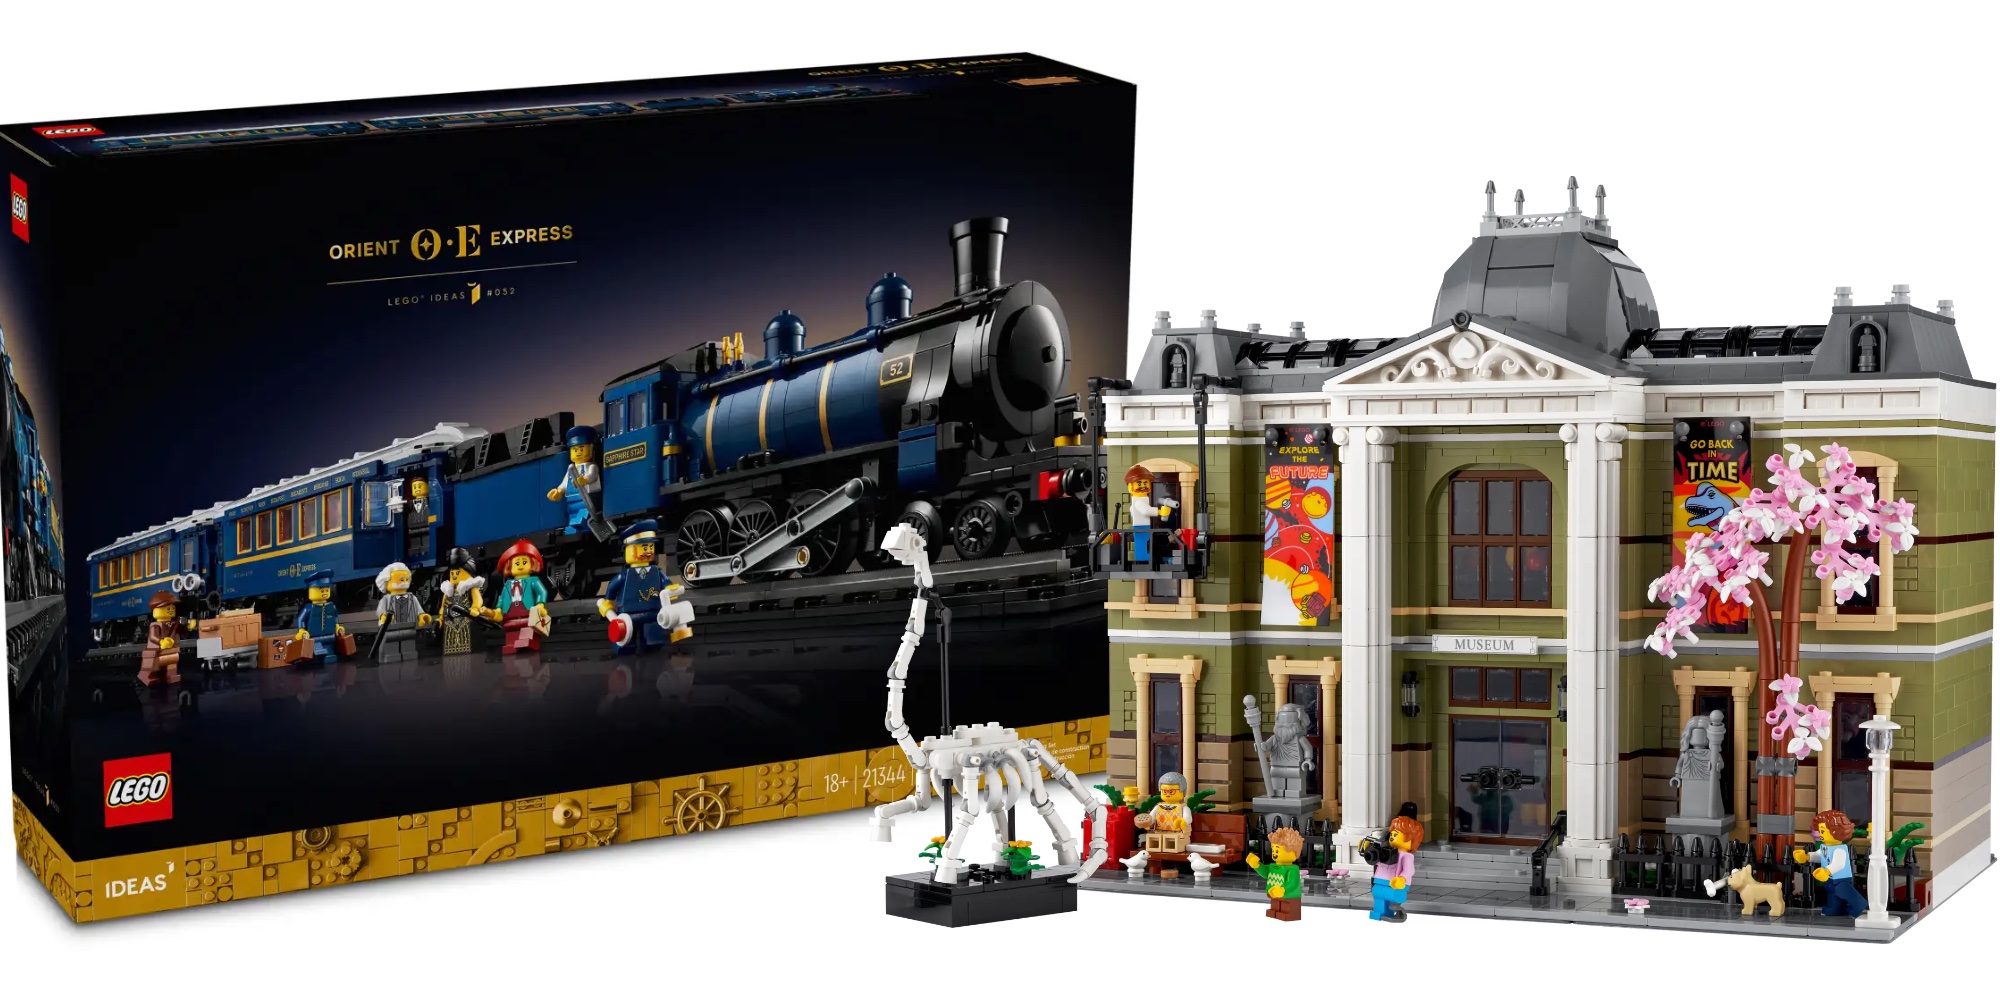 The LEGO Ideas Orient Express is Scheduled to Arrive in Your Collection  from December 1st - Jedi News